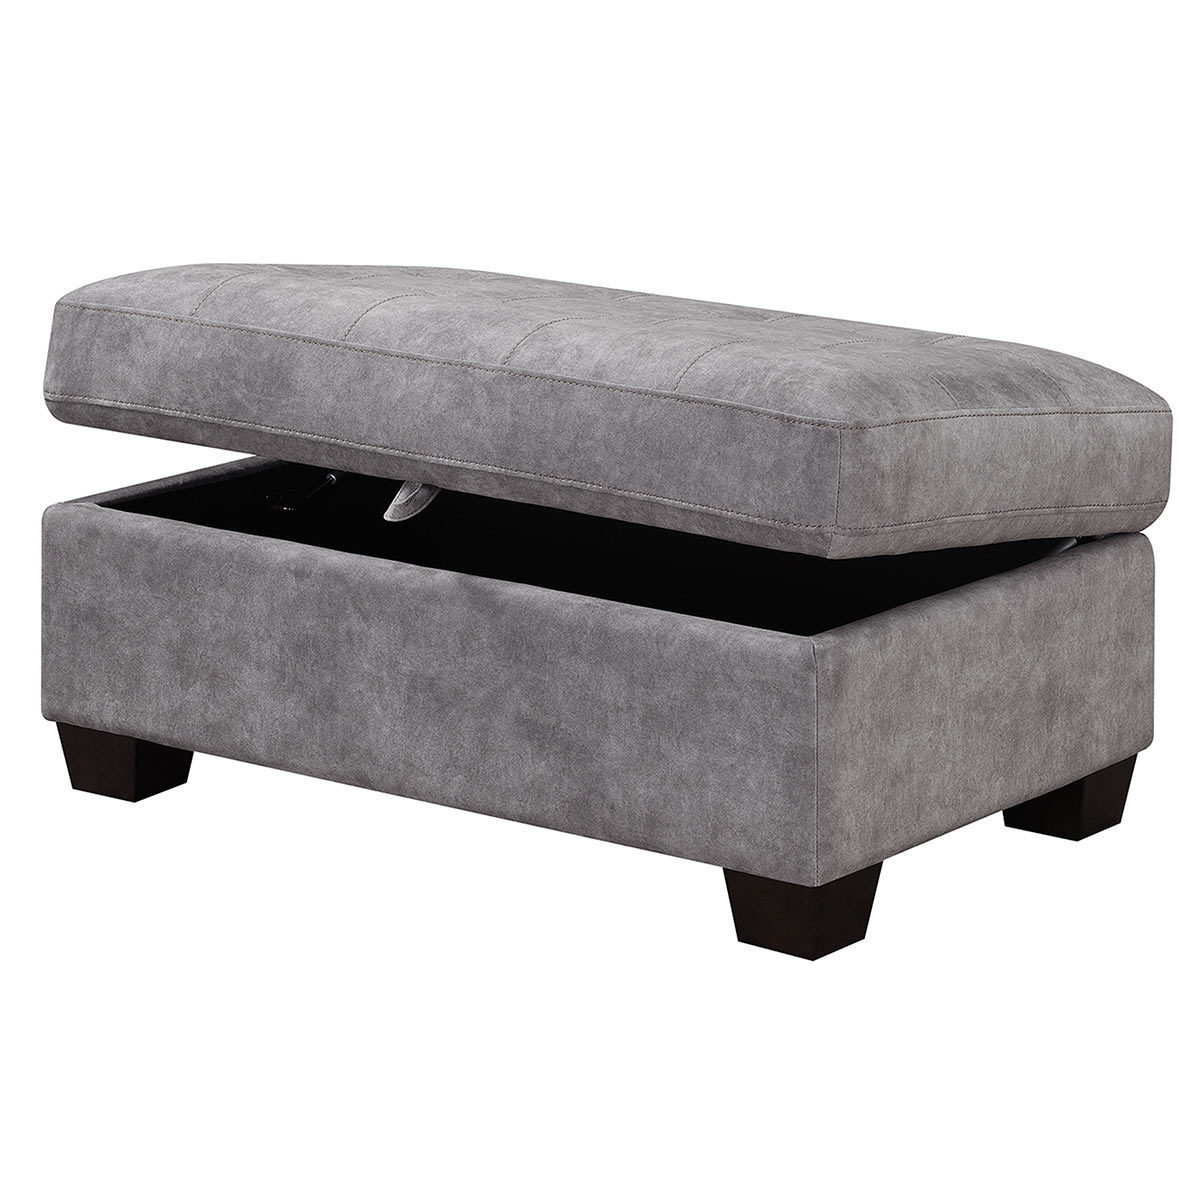 Angled image of storage ottoman on white background with lid partially open